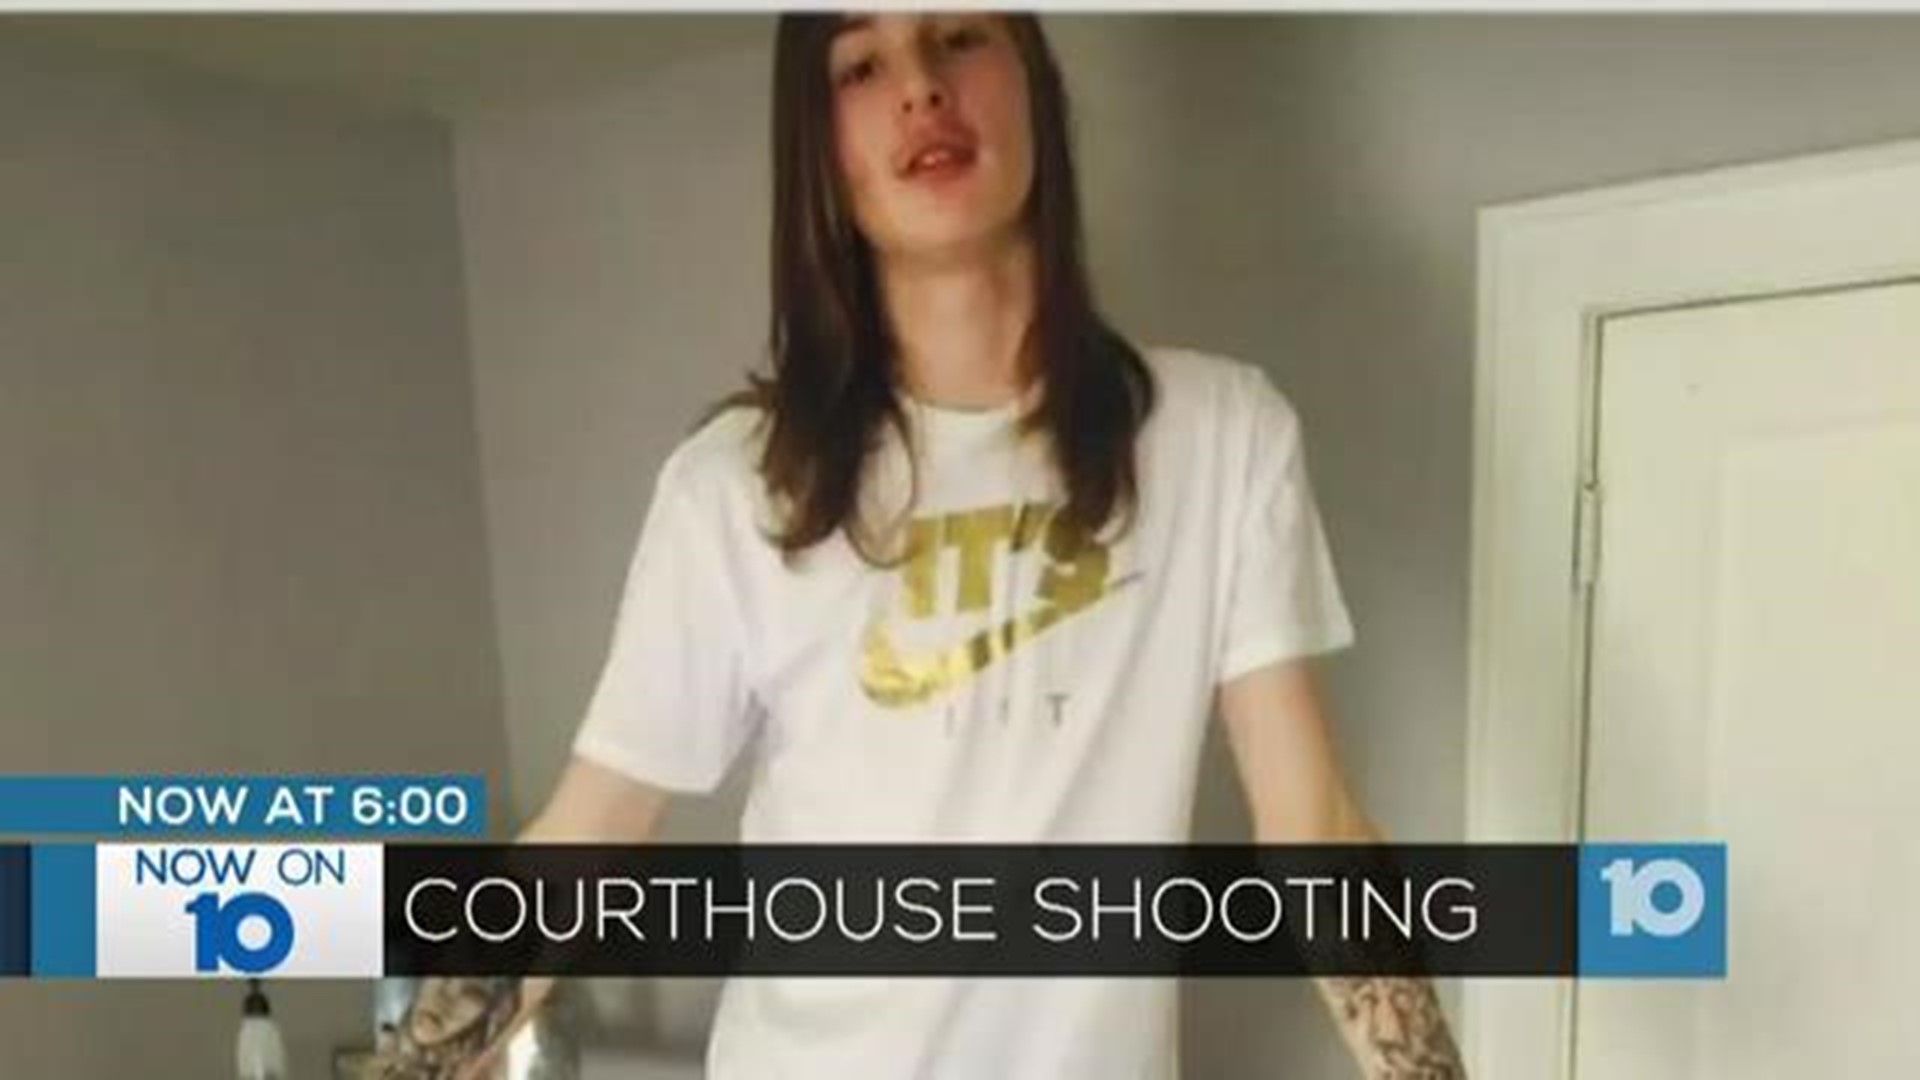 Conflicting stories emerge in Courthouse shooting that killed teen defendant